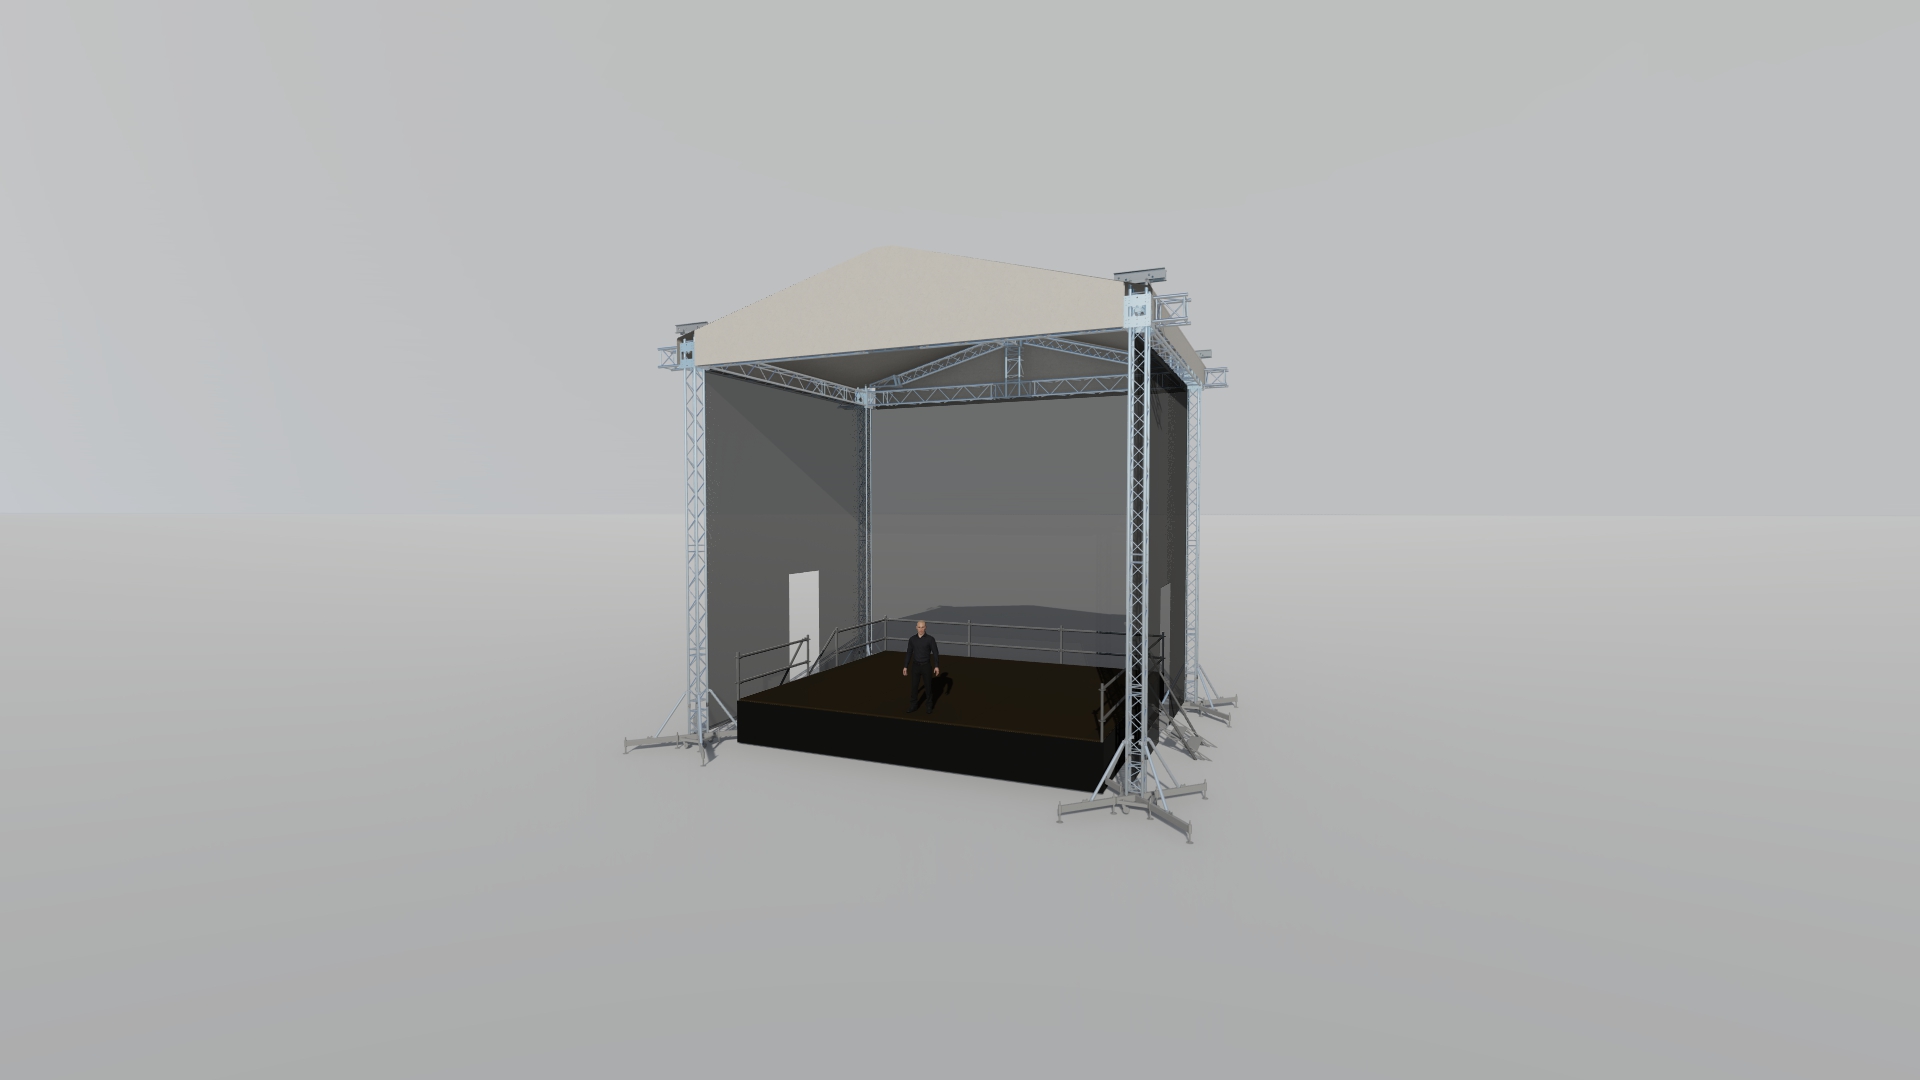 Stage system with the MPT roof